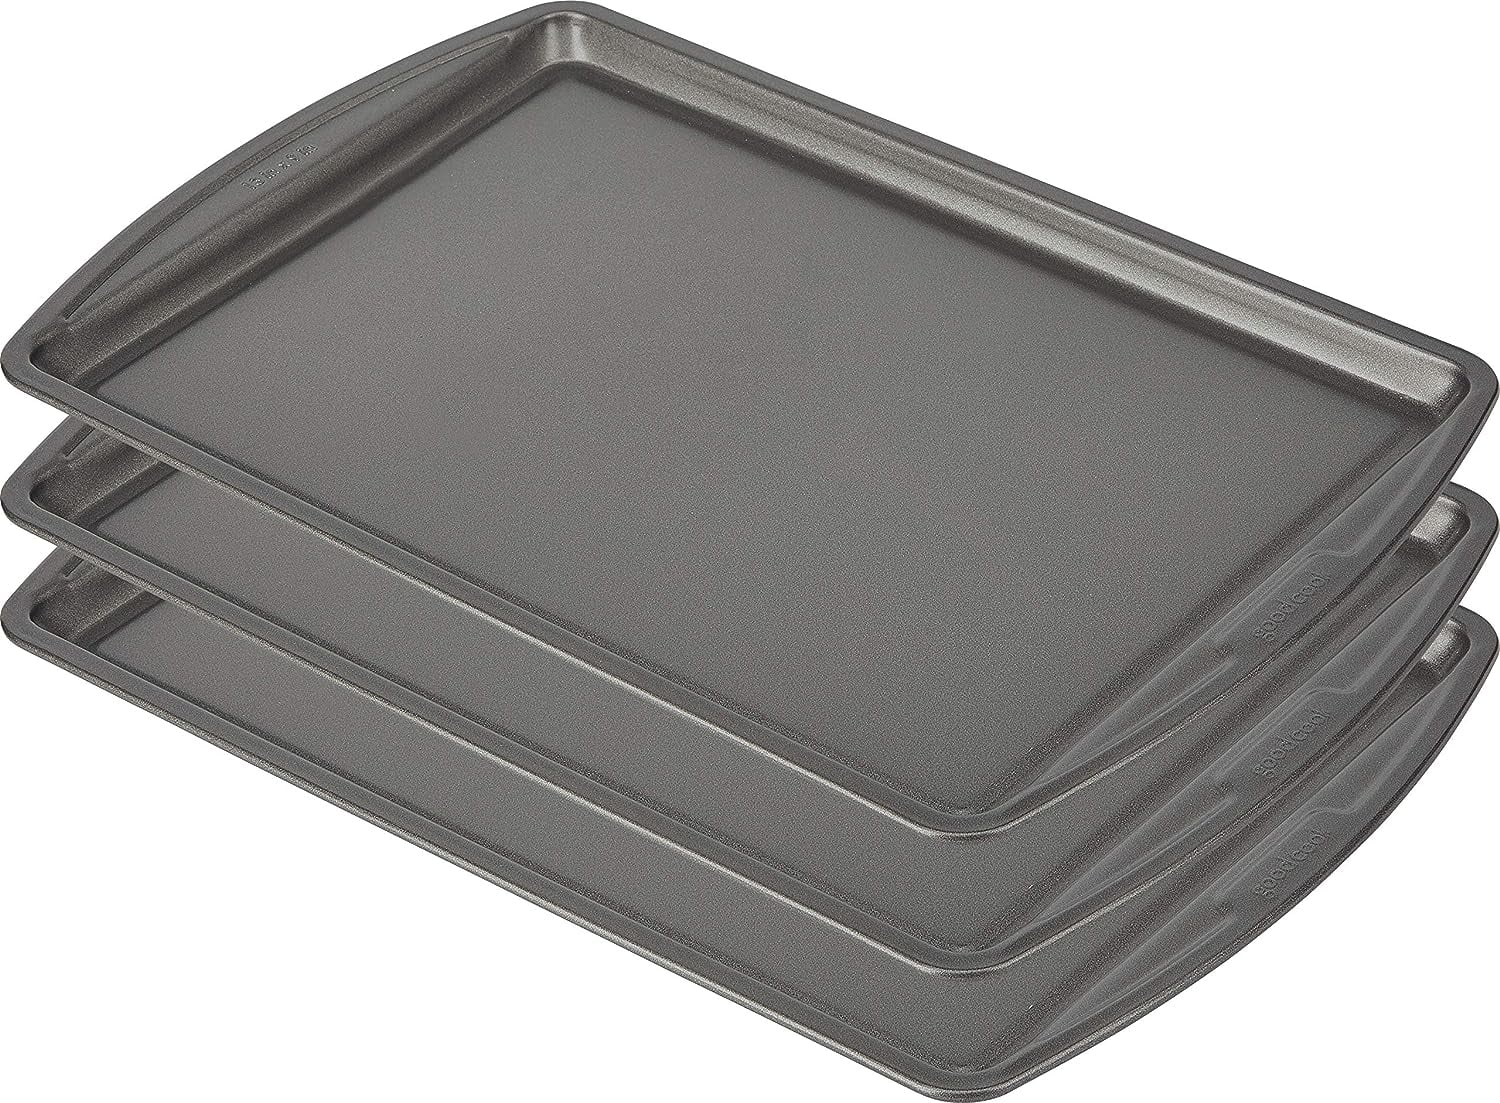  13 IN Baking Sheet and Cutting Board Compatible with